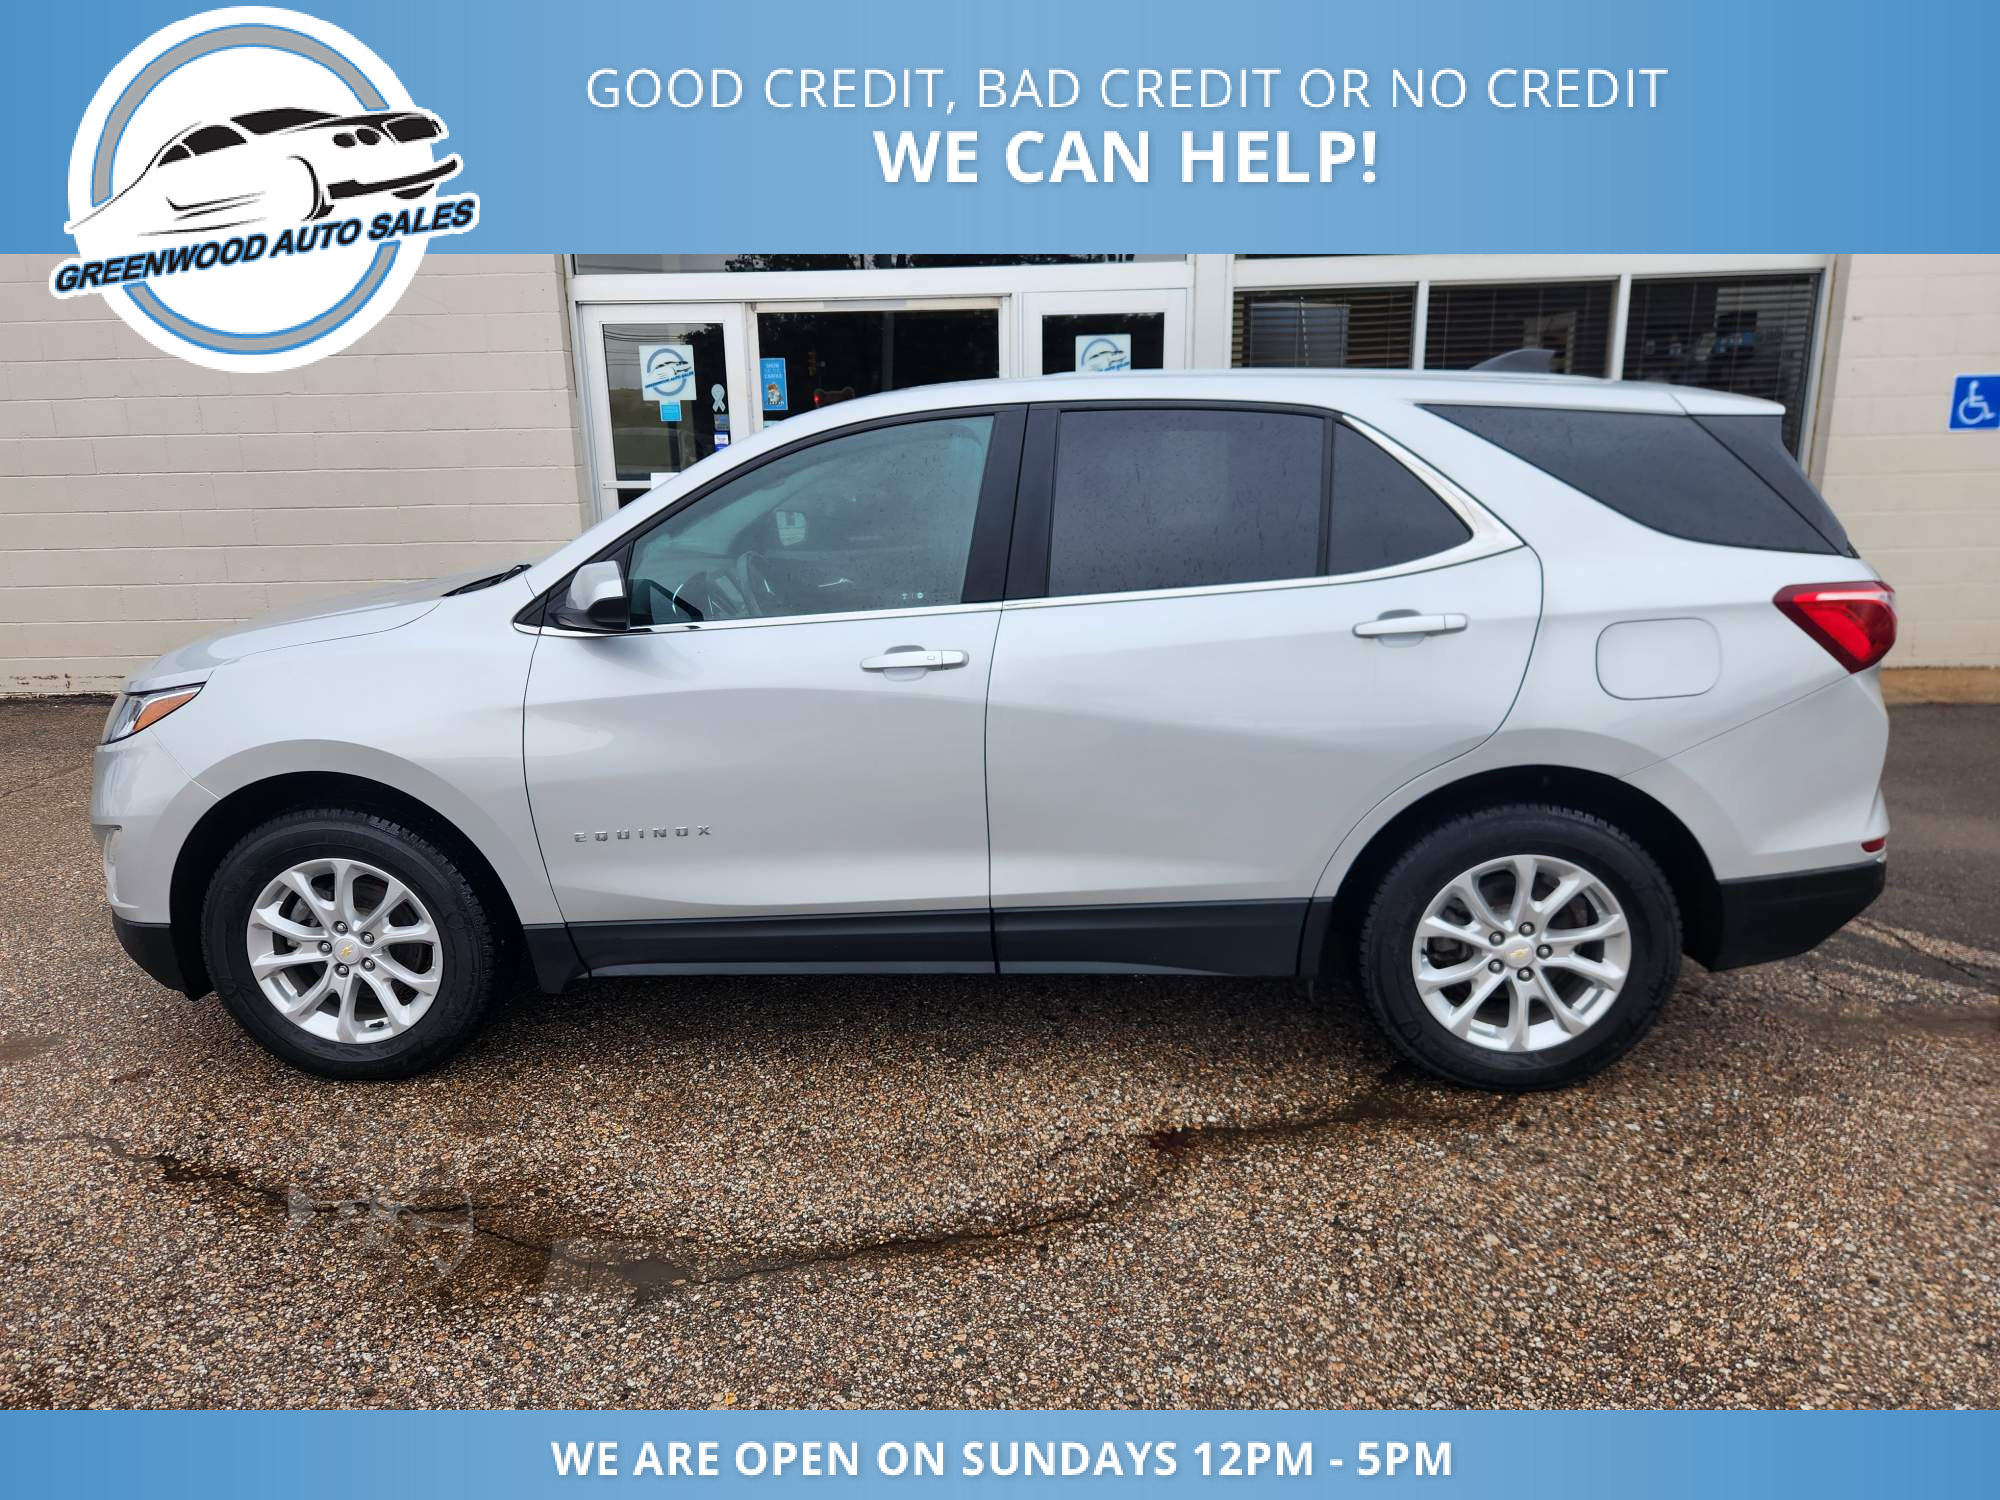 2021 Chevrolet Equinox LT CLEAN CARFAX!! -Great Price-Financing Available